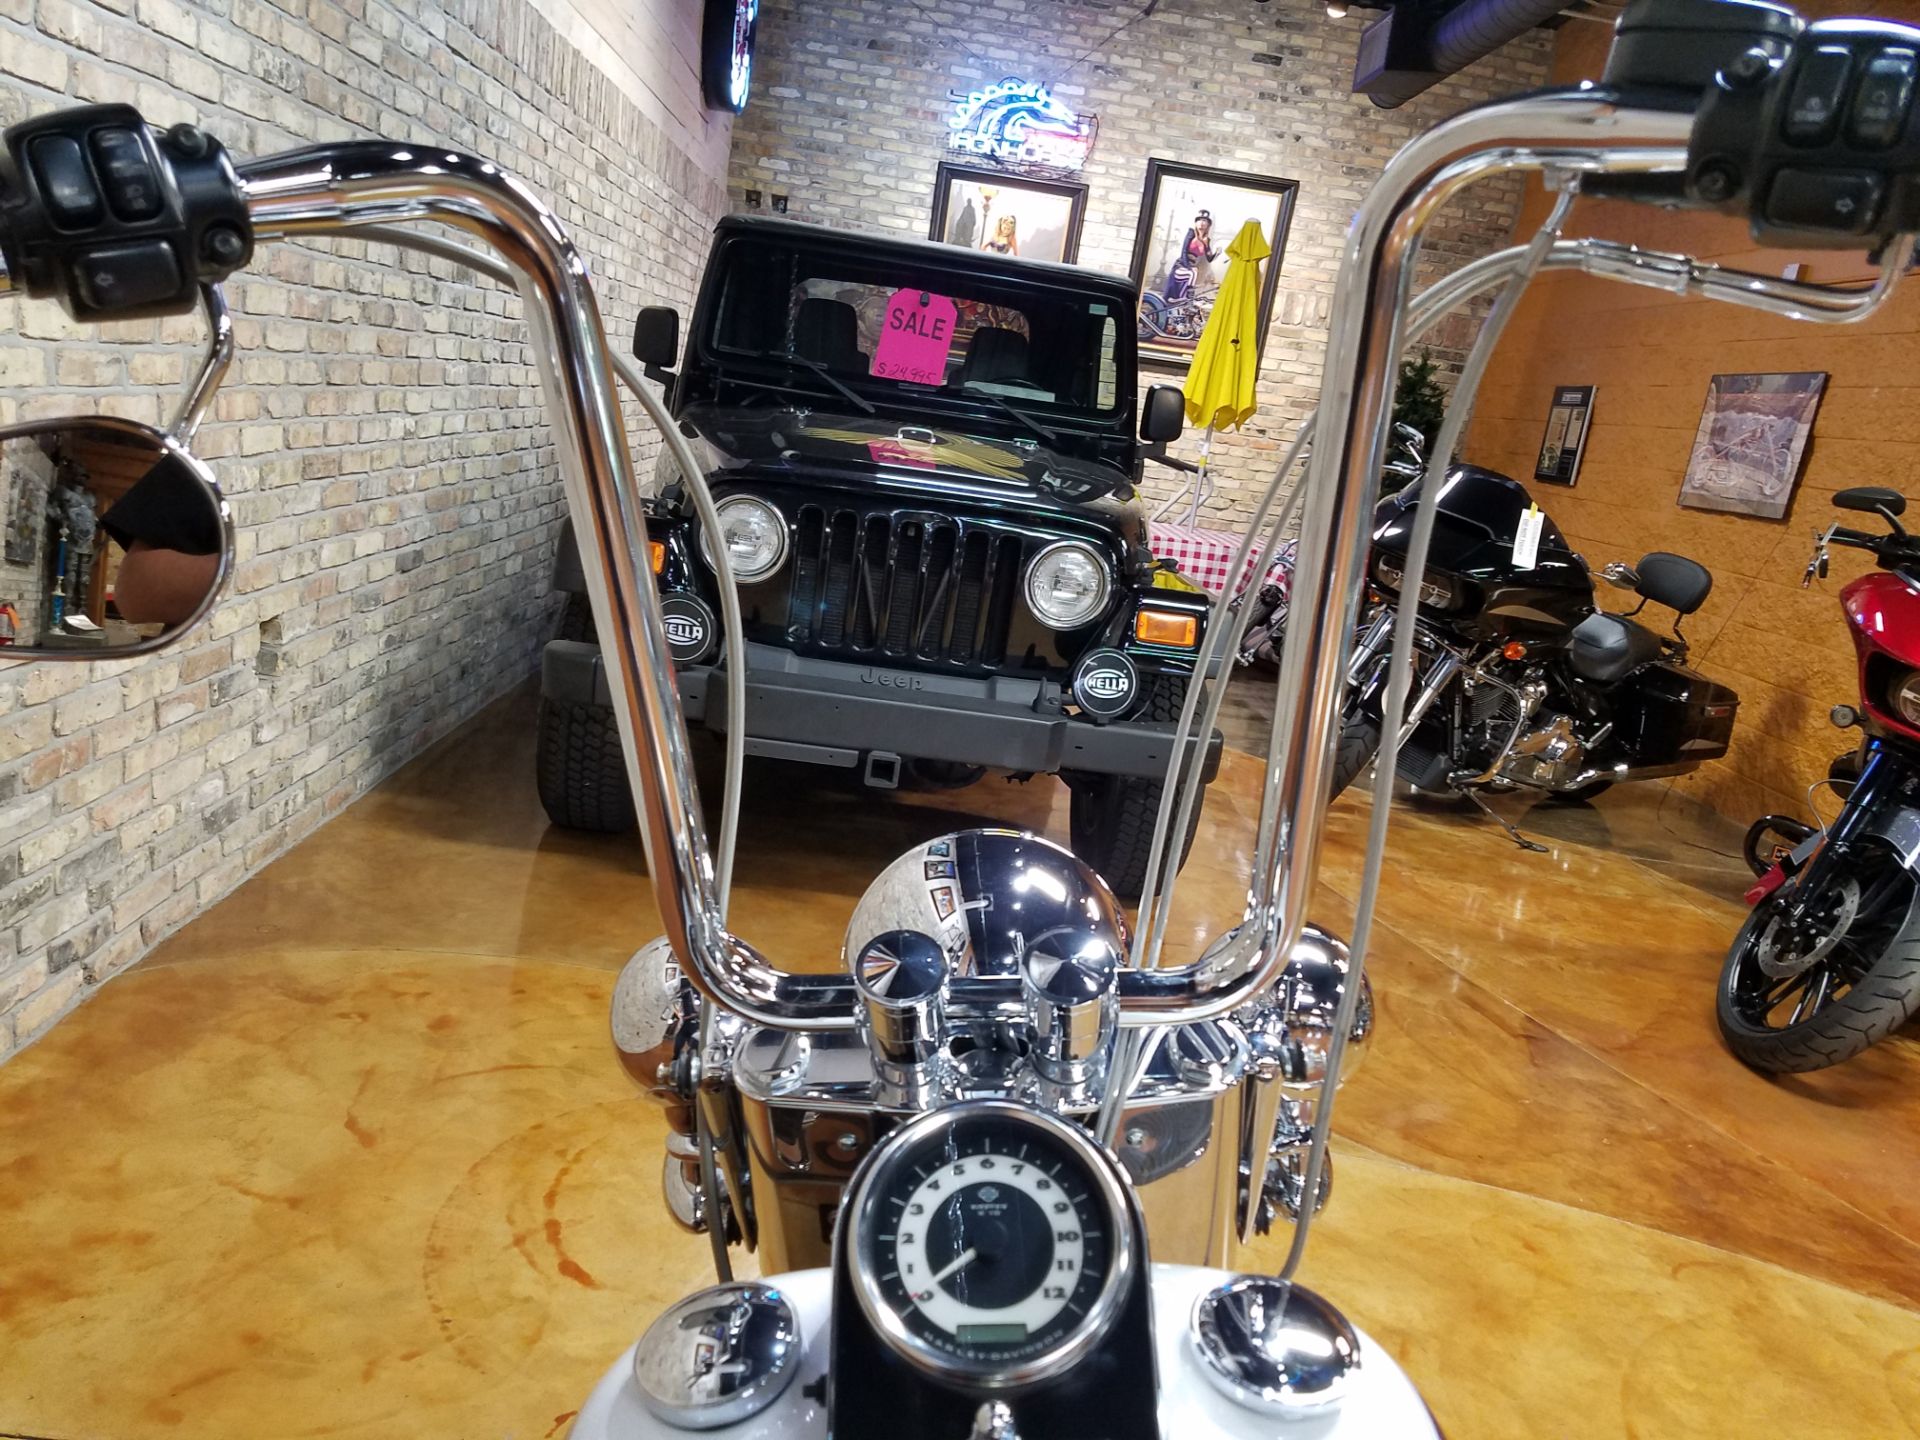 Used 2006 Harley Davidson Softail Deluxe Motorcycles In Big Bend Wi 4397 Two Tone Glacier White Deep Cobalt